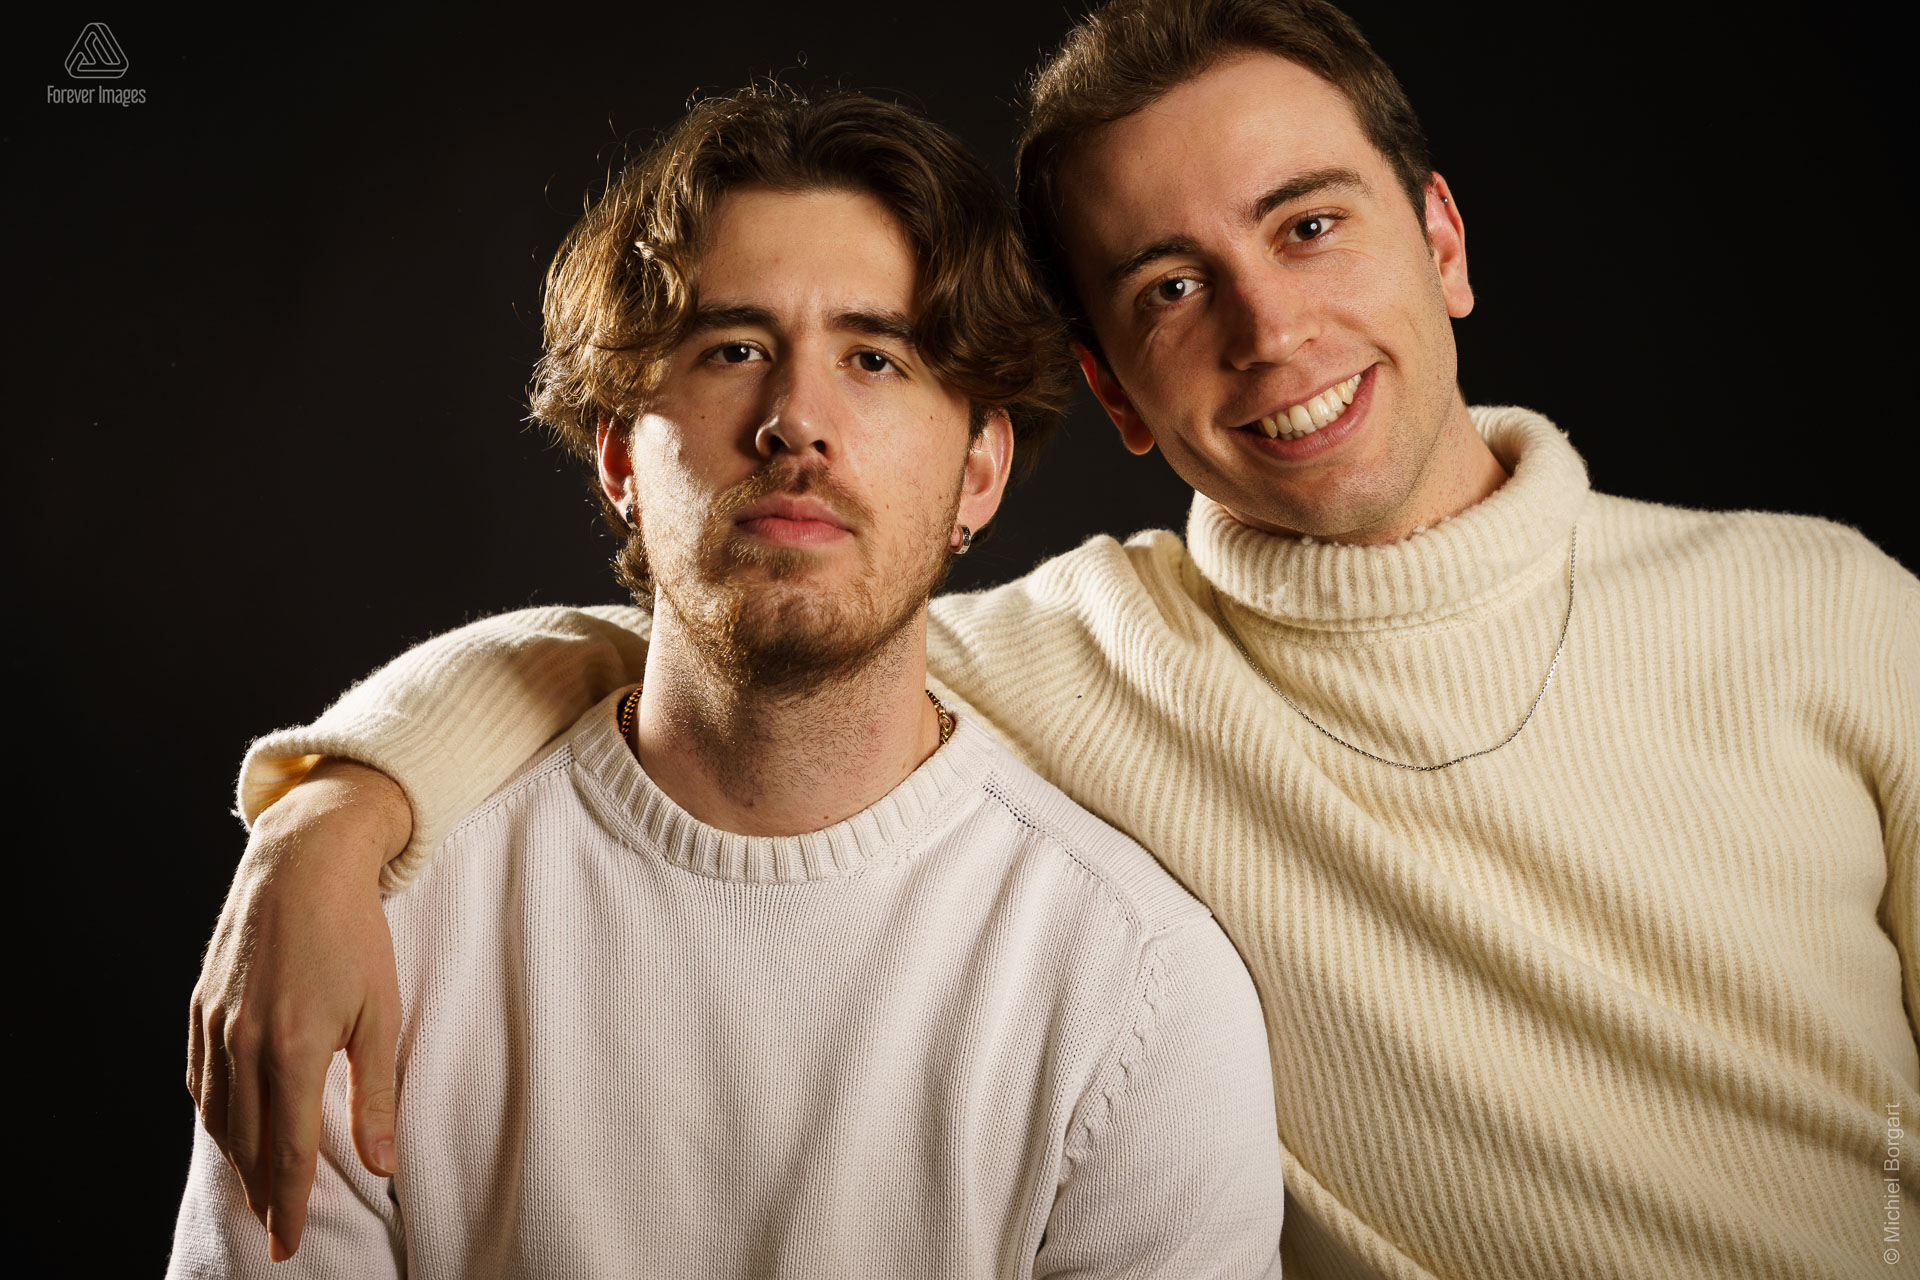 Portrait photo two brothers young men in white sweater | Santiago | Portrait Photographer Michiel Borgart - Forever Images.